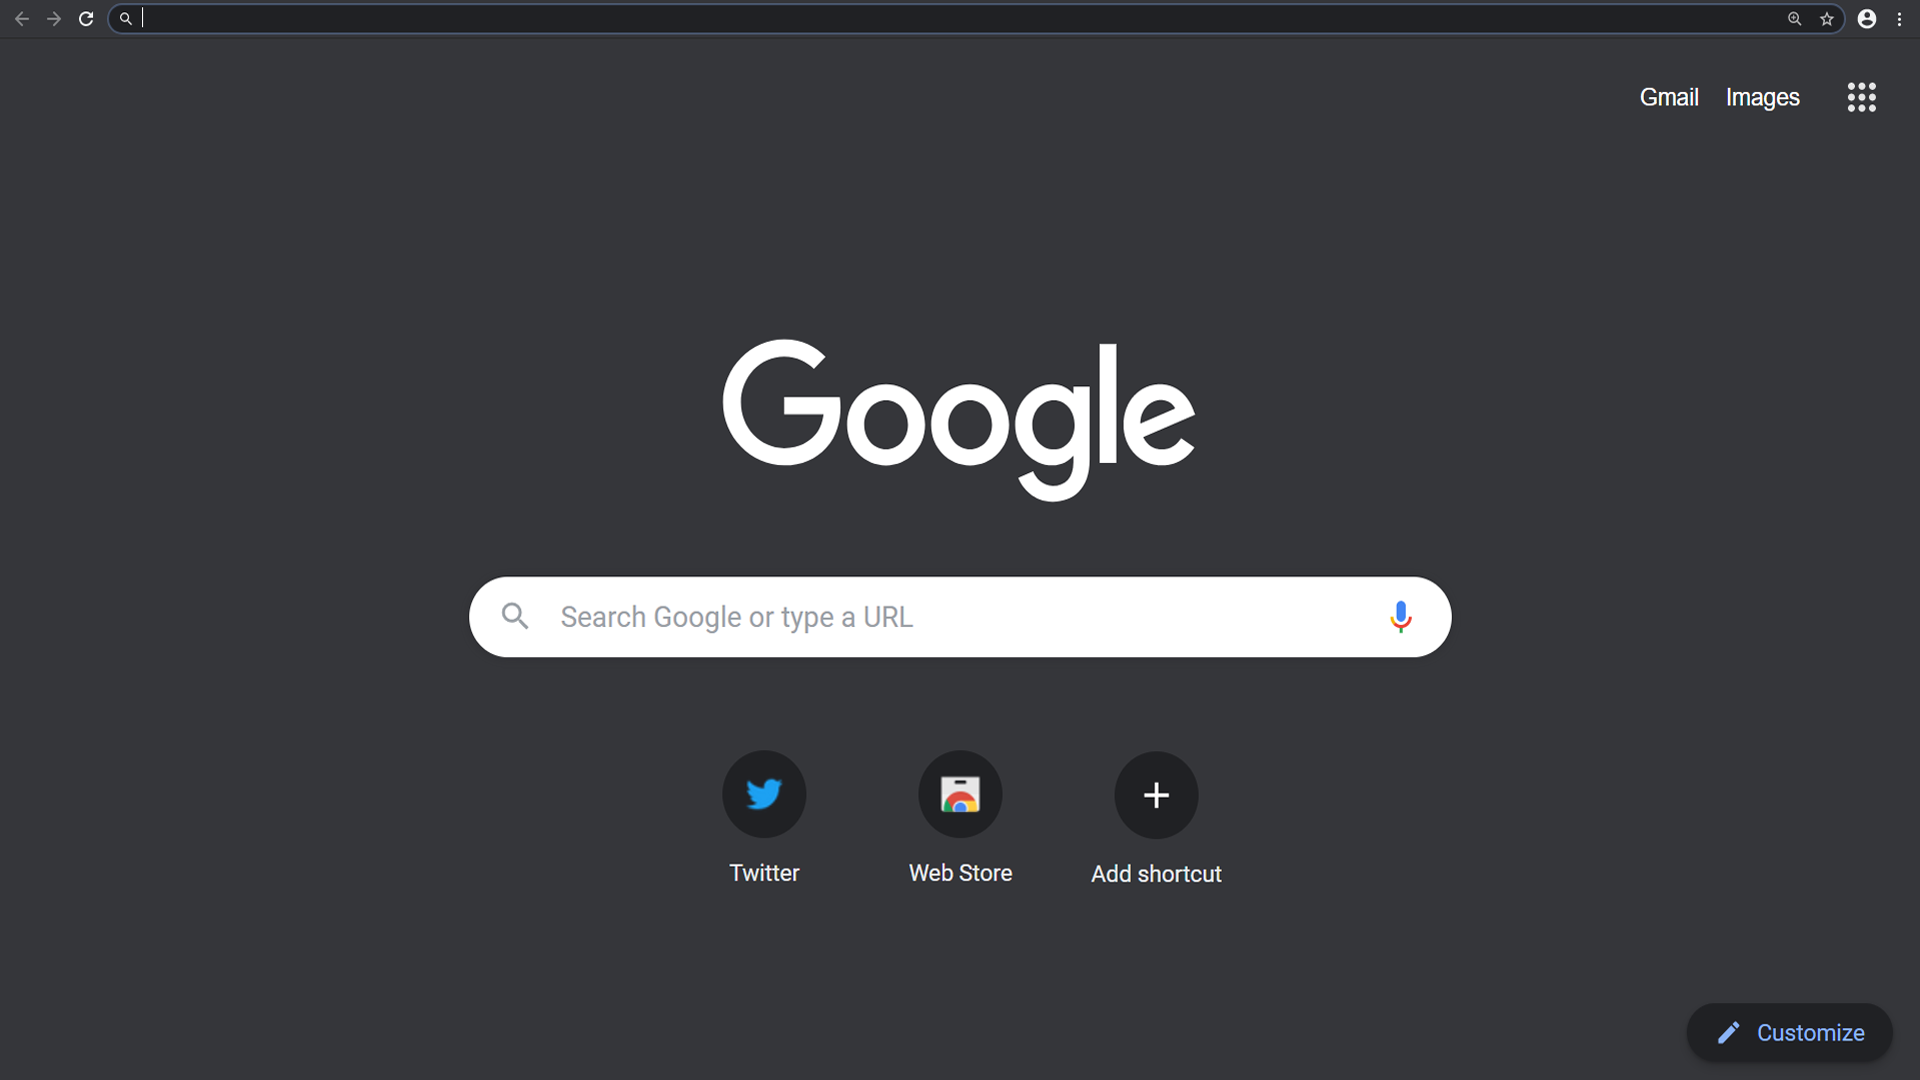 Chrome S Dark Mode Is About To Get Much Better With This Change